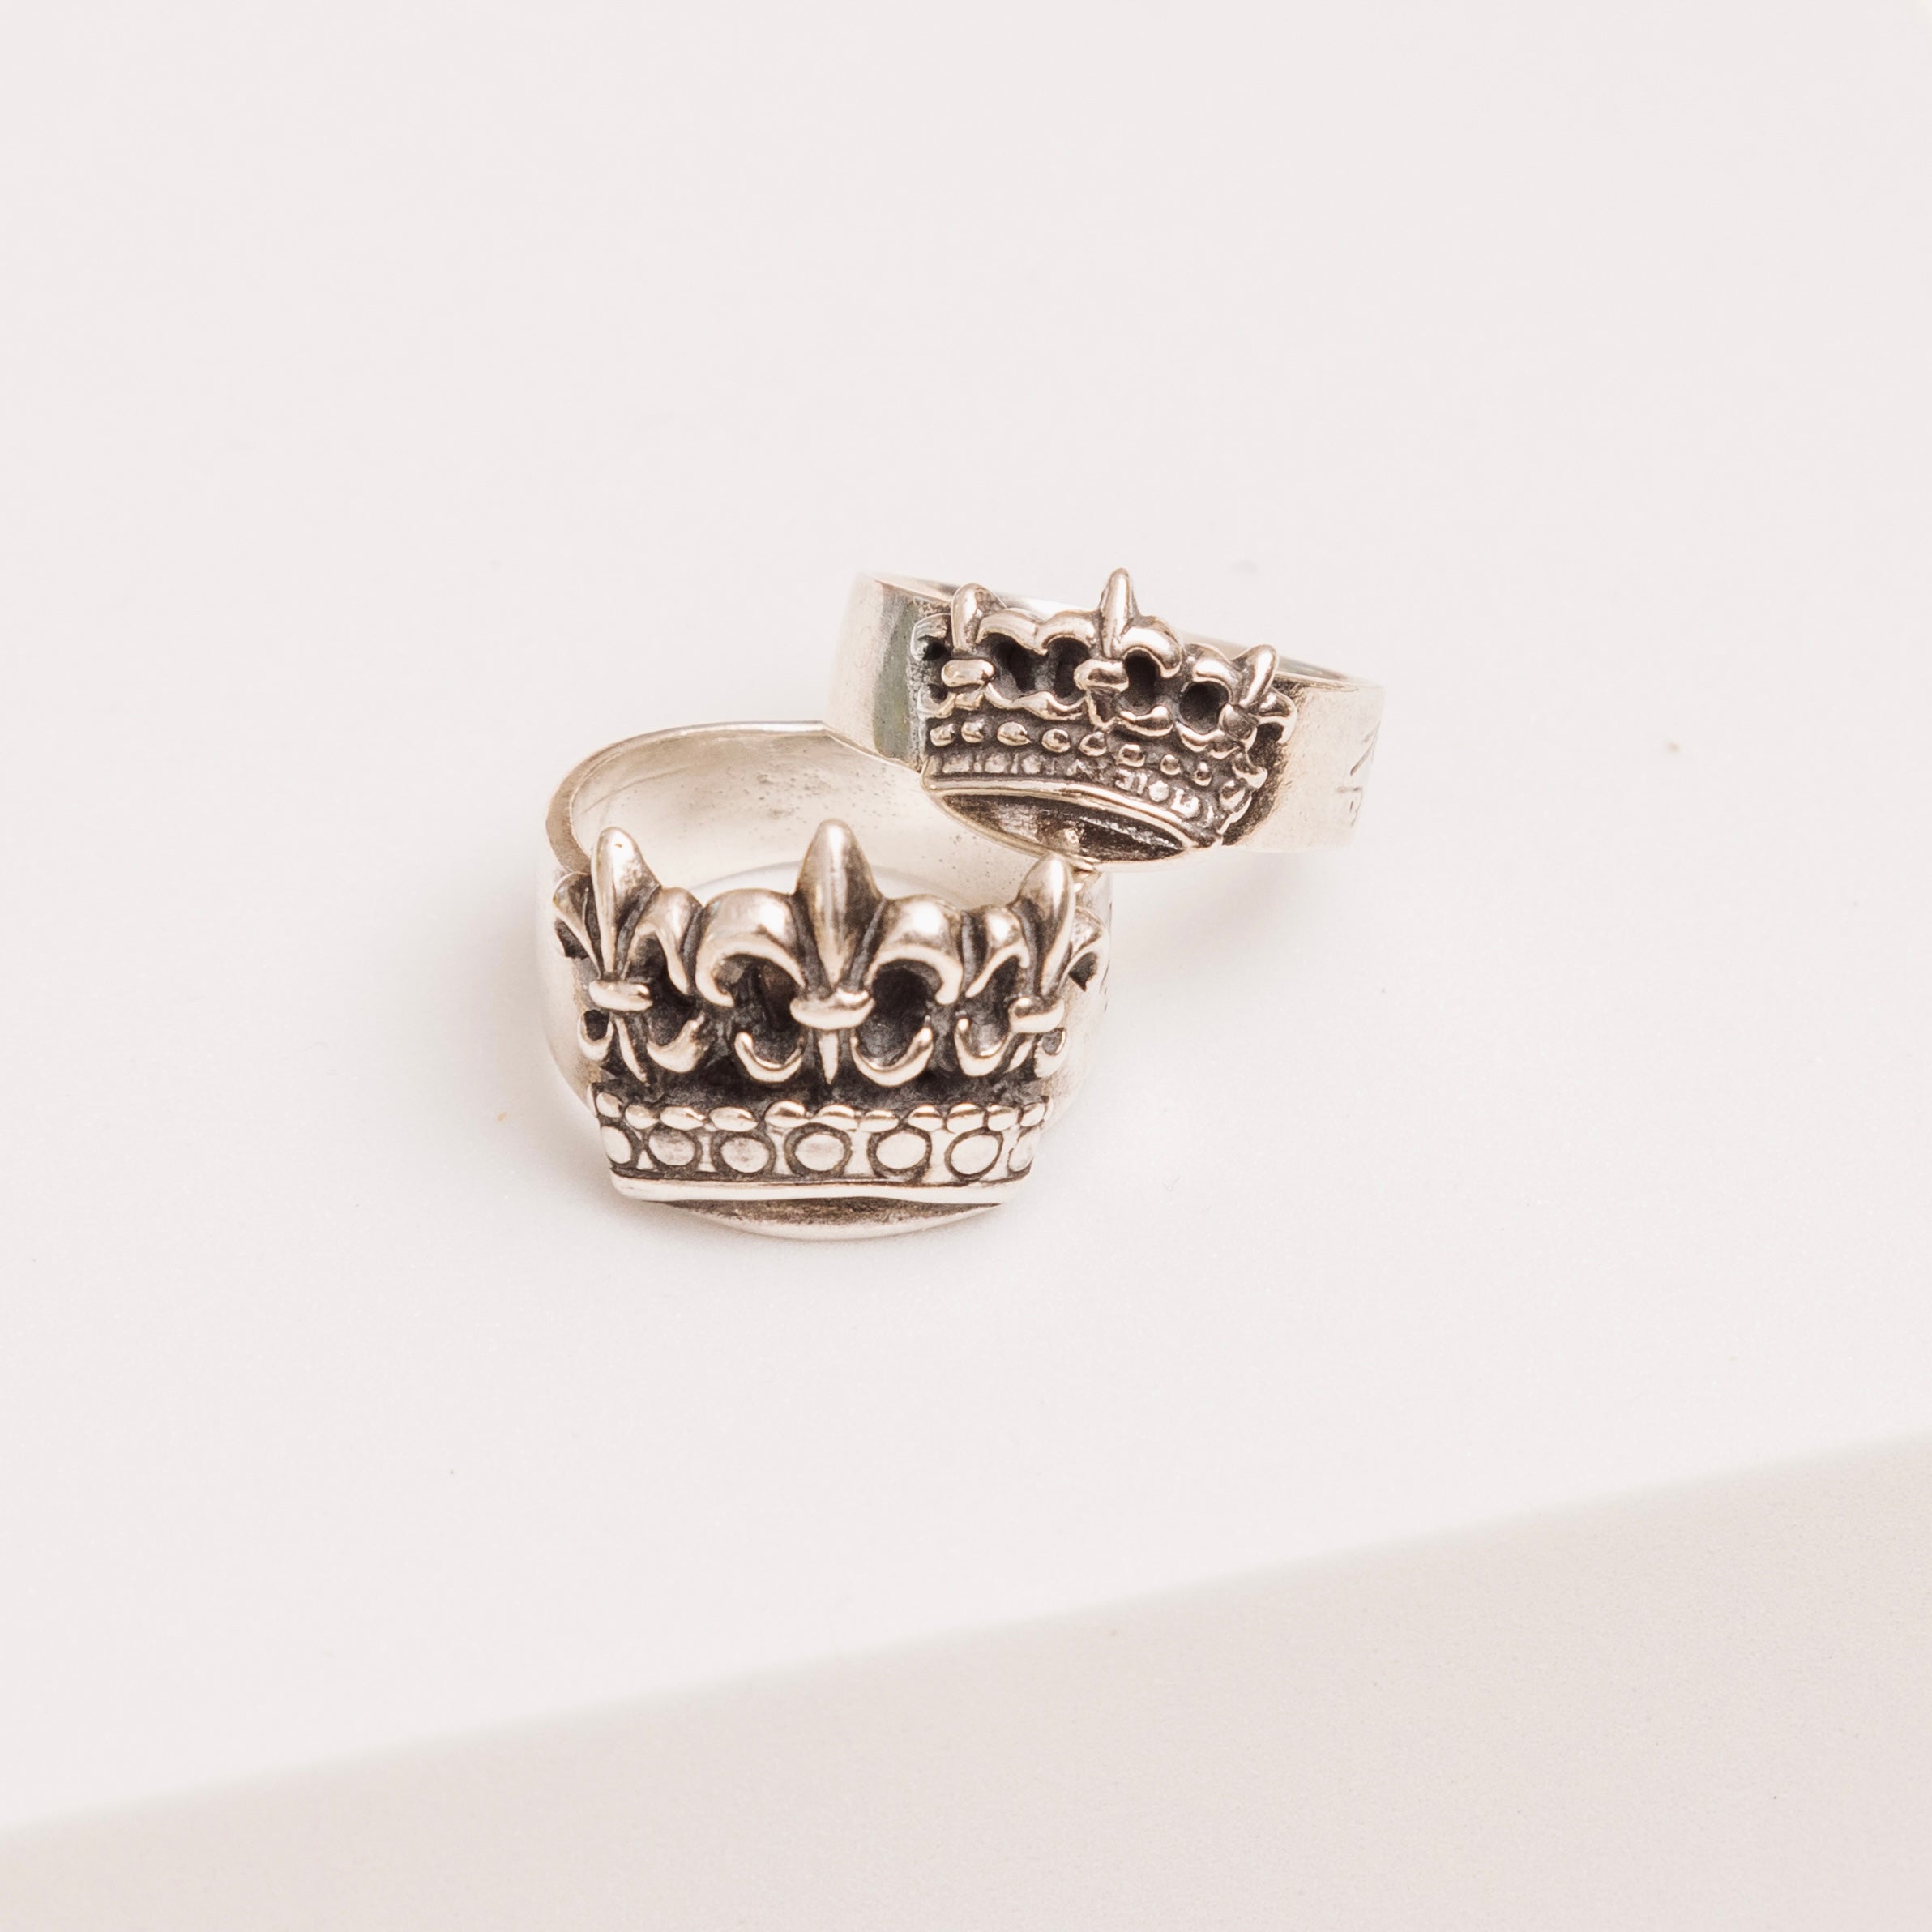 How To Wear And Style Crown Rings For Everyday Glamour?